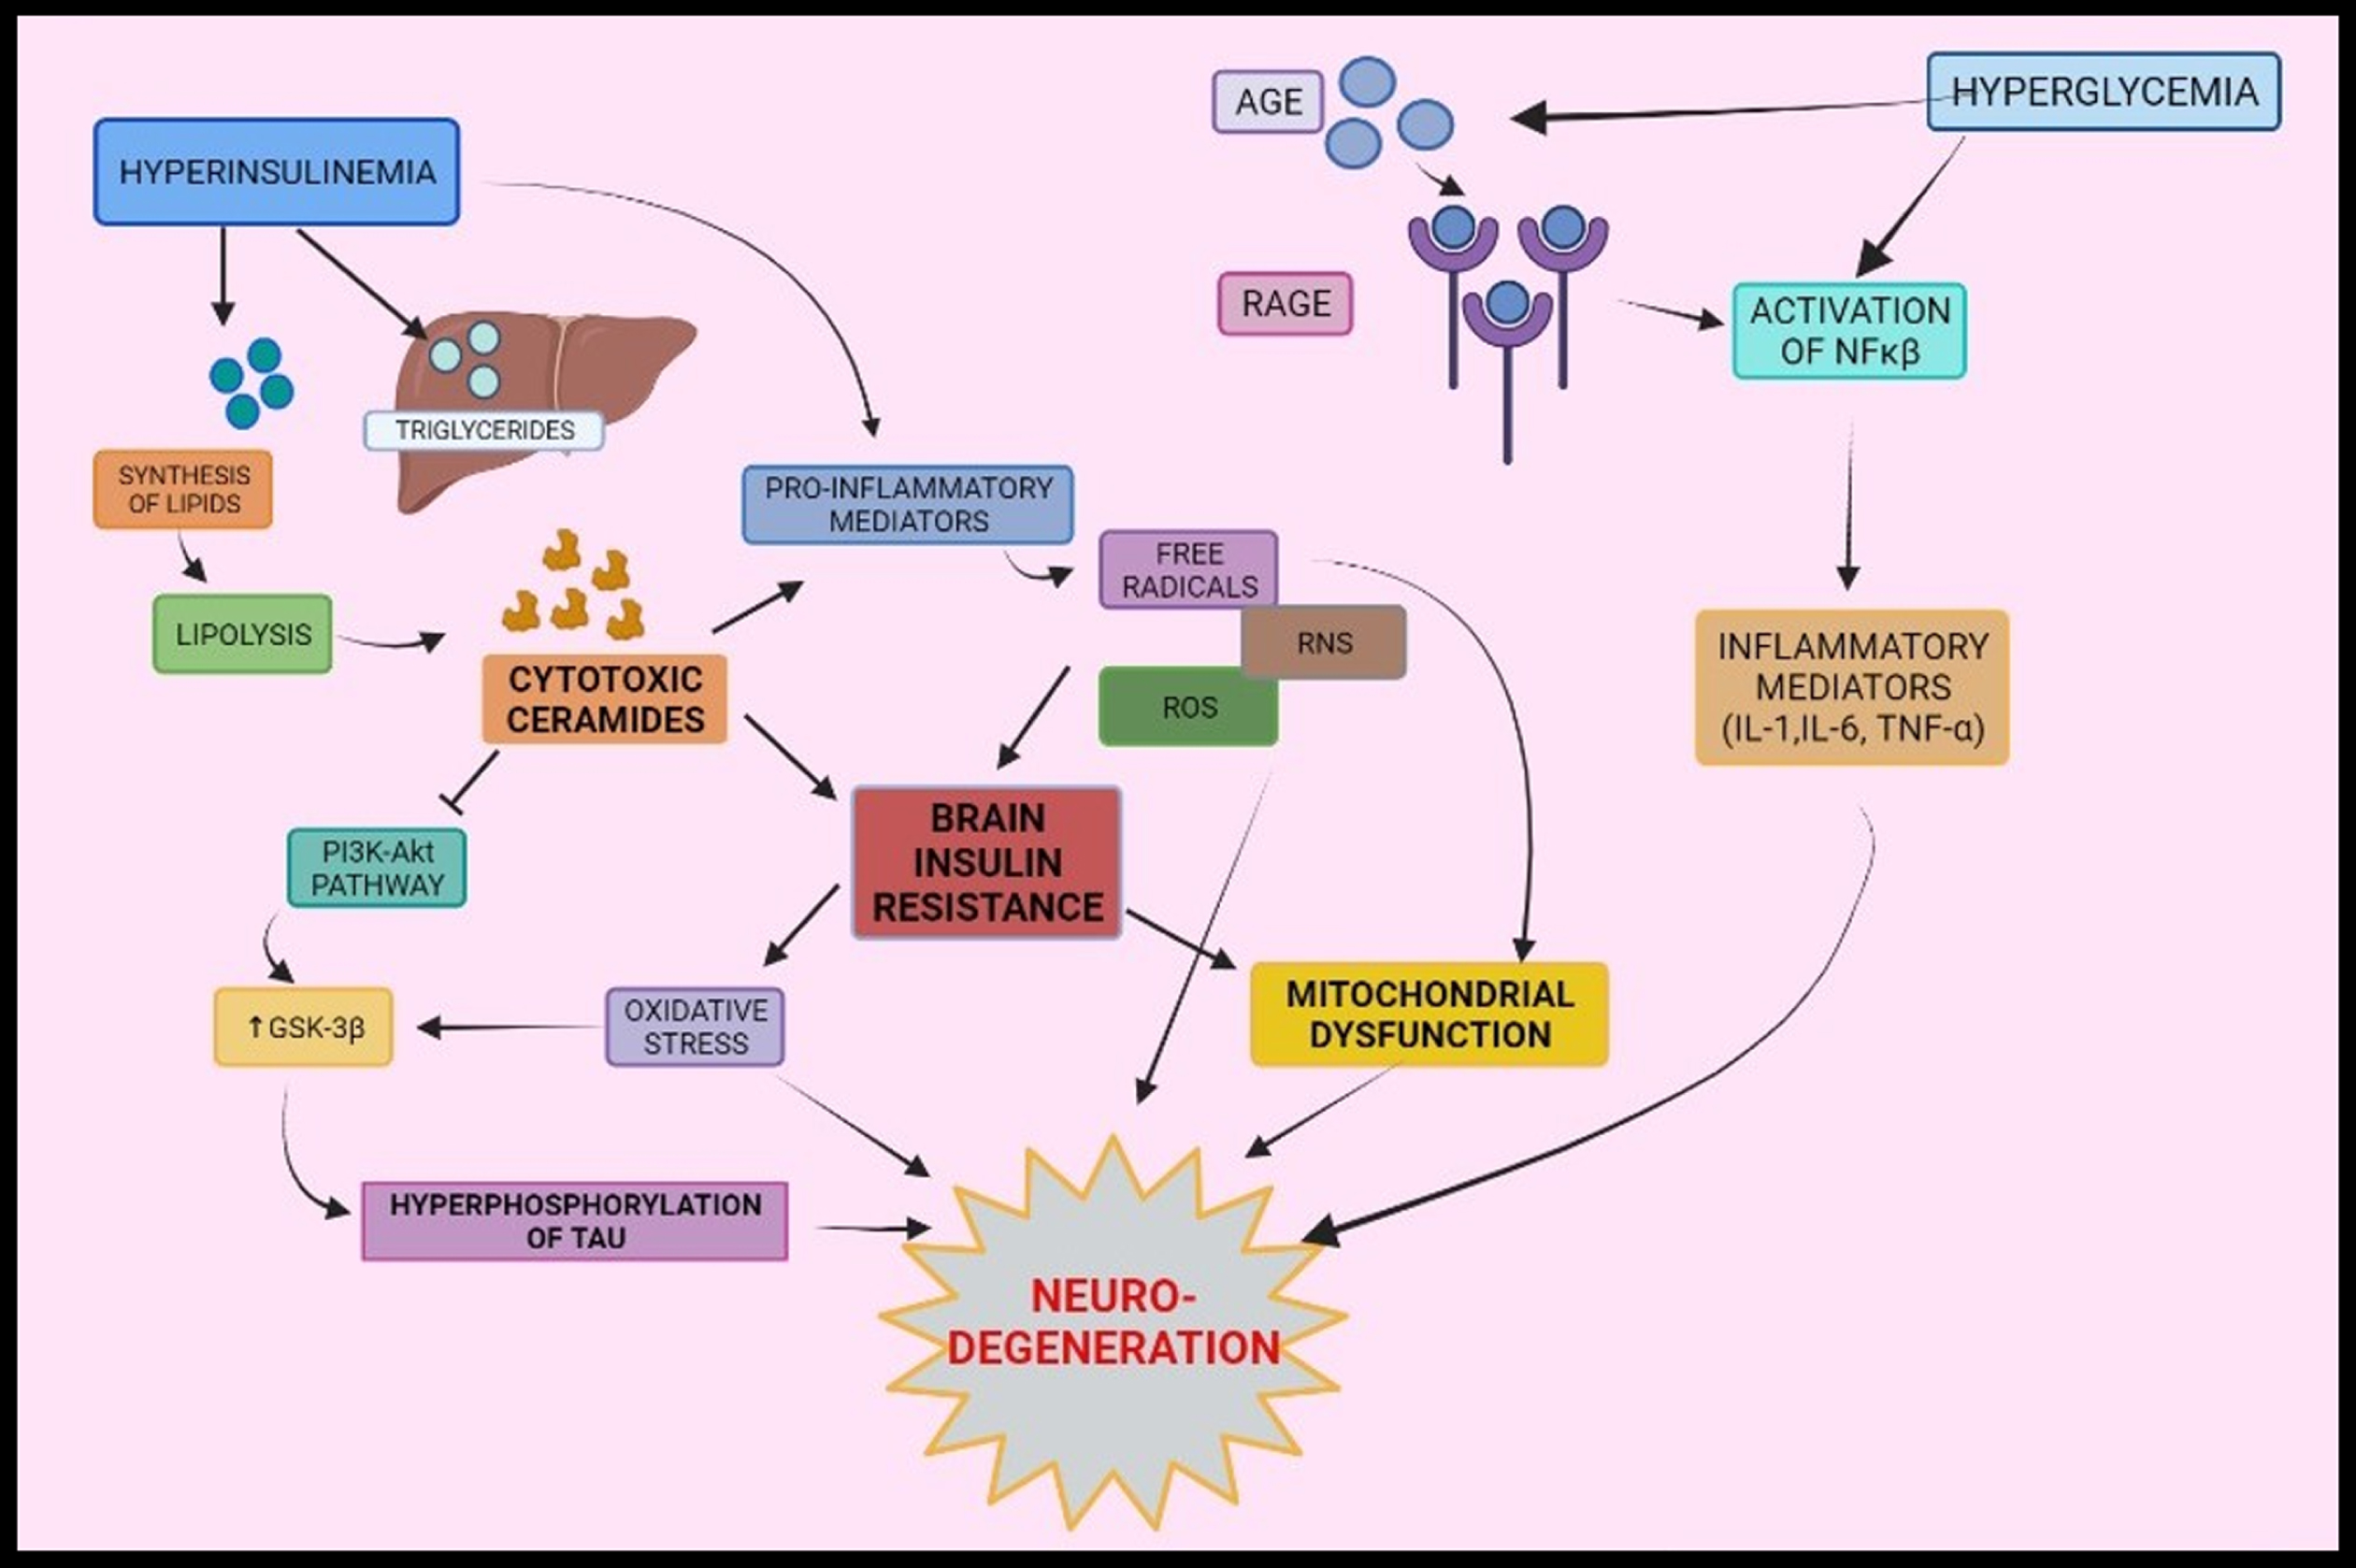 Interrelationship between type-2 diabetes mellitus and Alzheimer’s disease via oxidative stress, mitochondrial dysfunction, and inflammation: Peripheral insulin levels regulate synthesis and breakdown of lipids. Inflammatory mediators are formed by various pathways- activation of NF-κ
β via binding of AGE to its receptors, cytotoxic ceramides formed as a result of lipolysis and peripheral insulin levels. Formations of inflammatory mediators elicit a series of responses that leads to brain insulin resistance and oxidative stress and mitochondrial dysfunction and results into neurodegeneration. AGE, Advanced glycated end products; RAGE, Receptors of AGE; NF-κ
β, Nuclear factor kappa β.